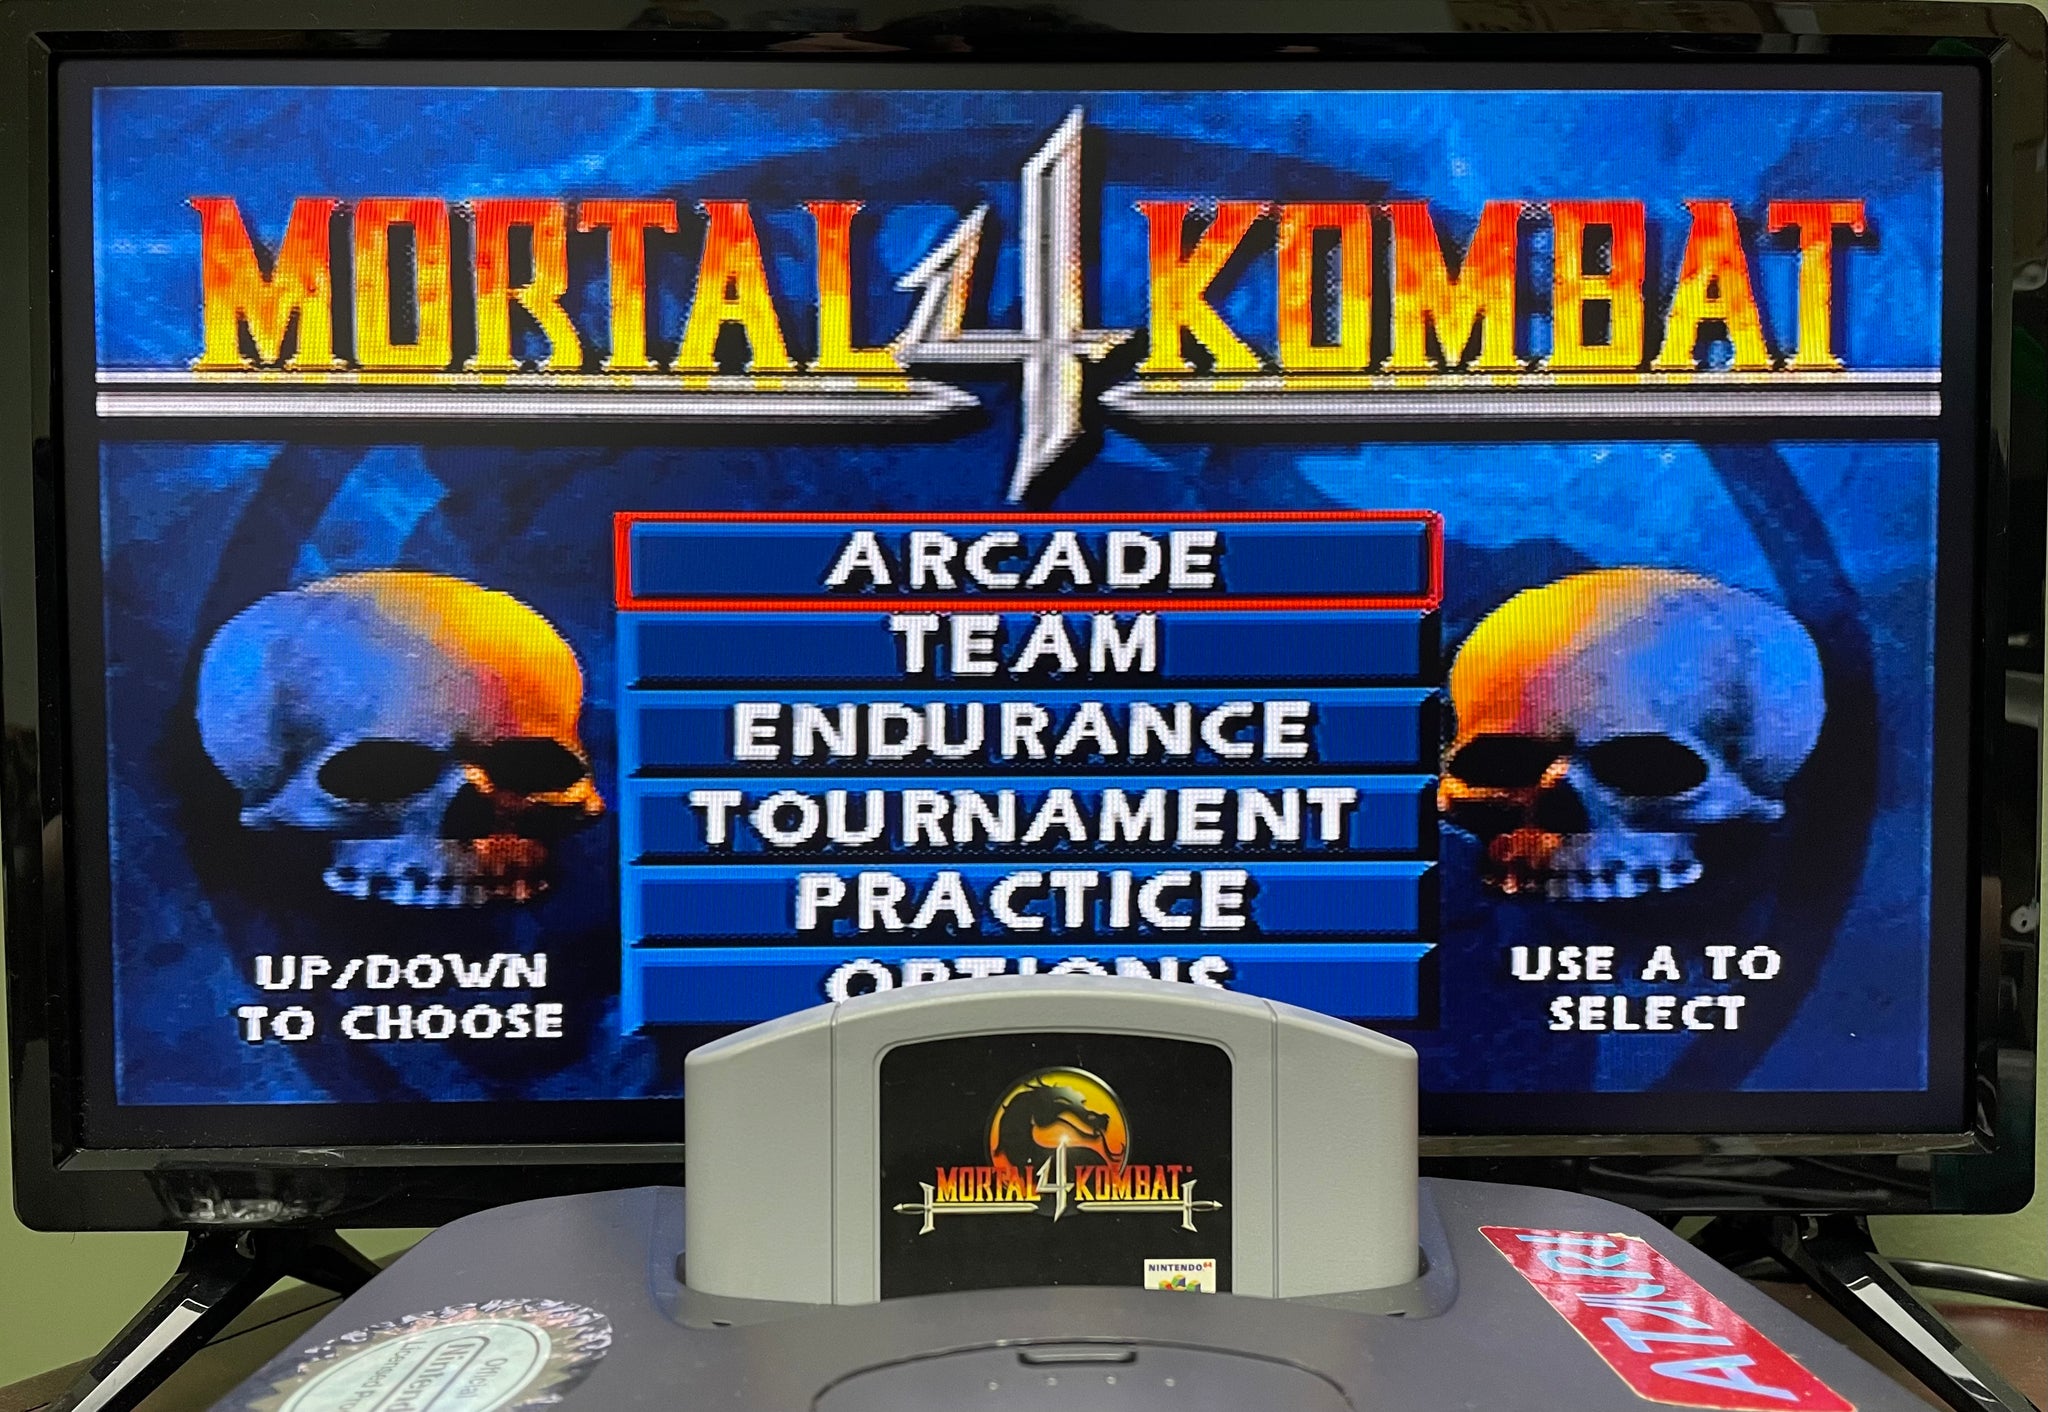 Play Nintendo 64 Mortal Kombat 4 (USA) Online in your browser 